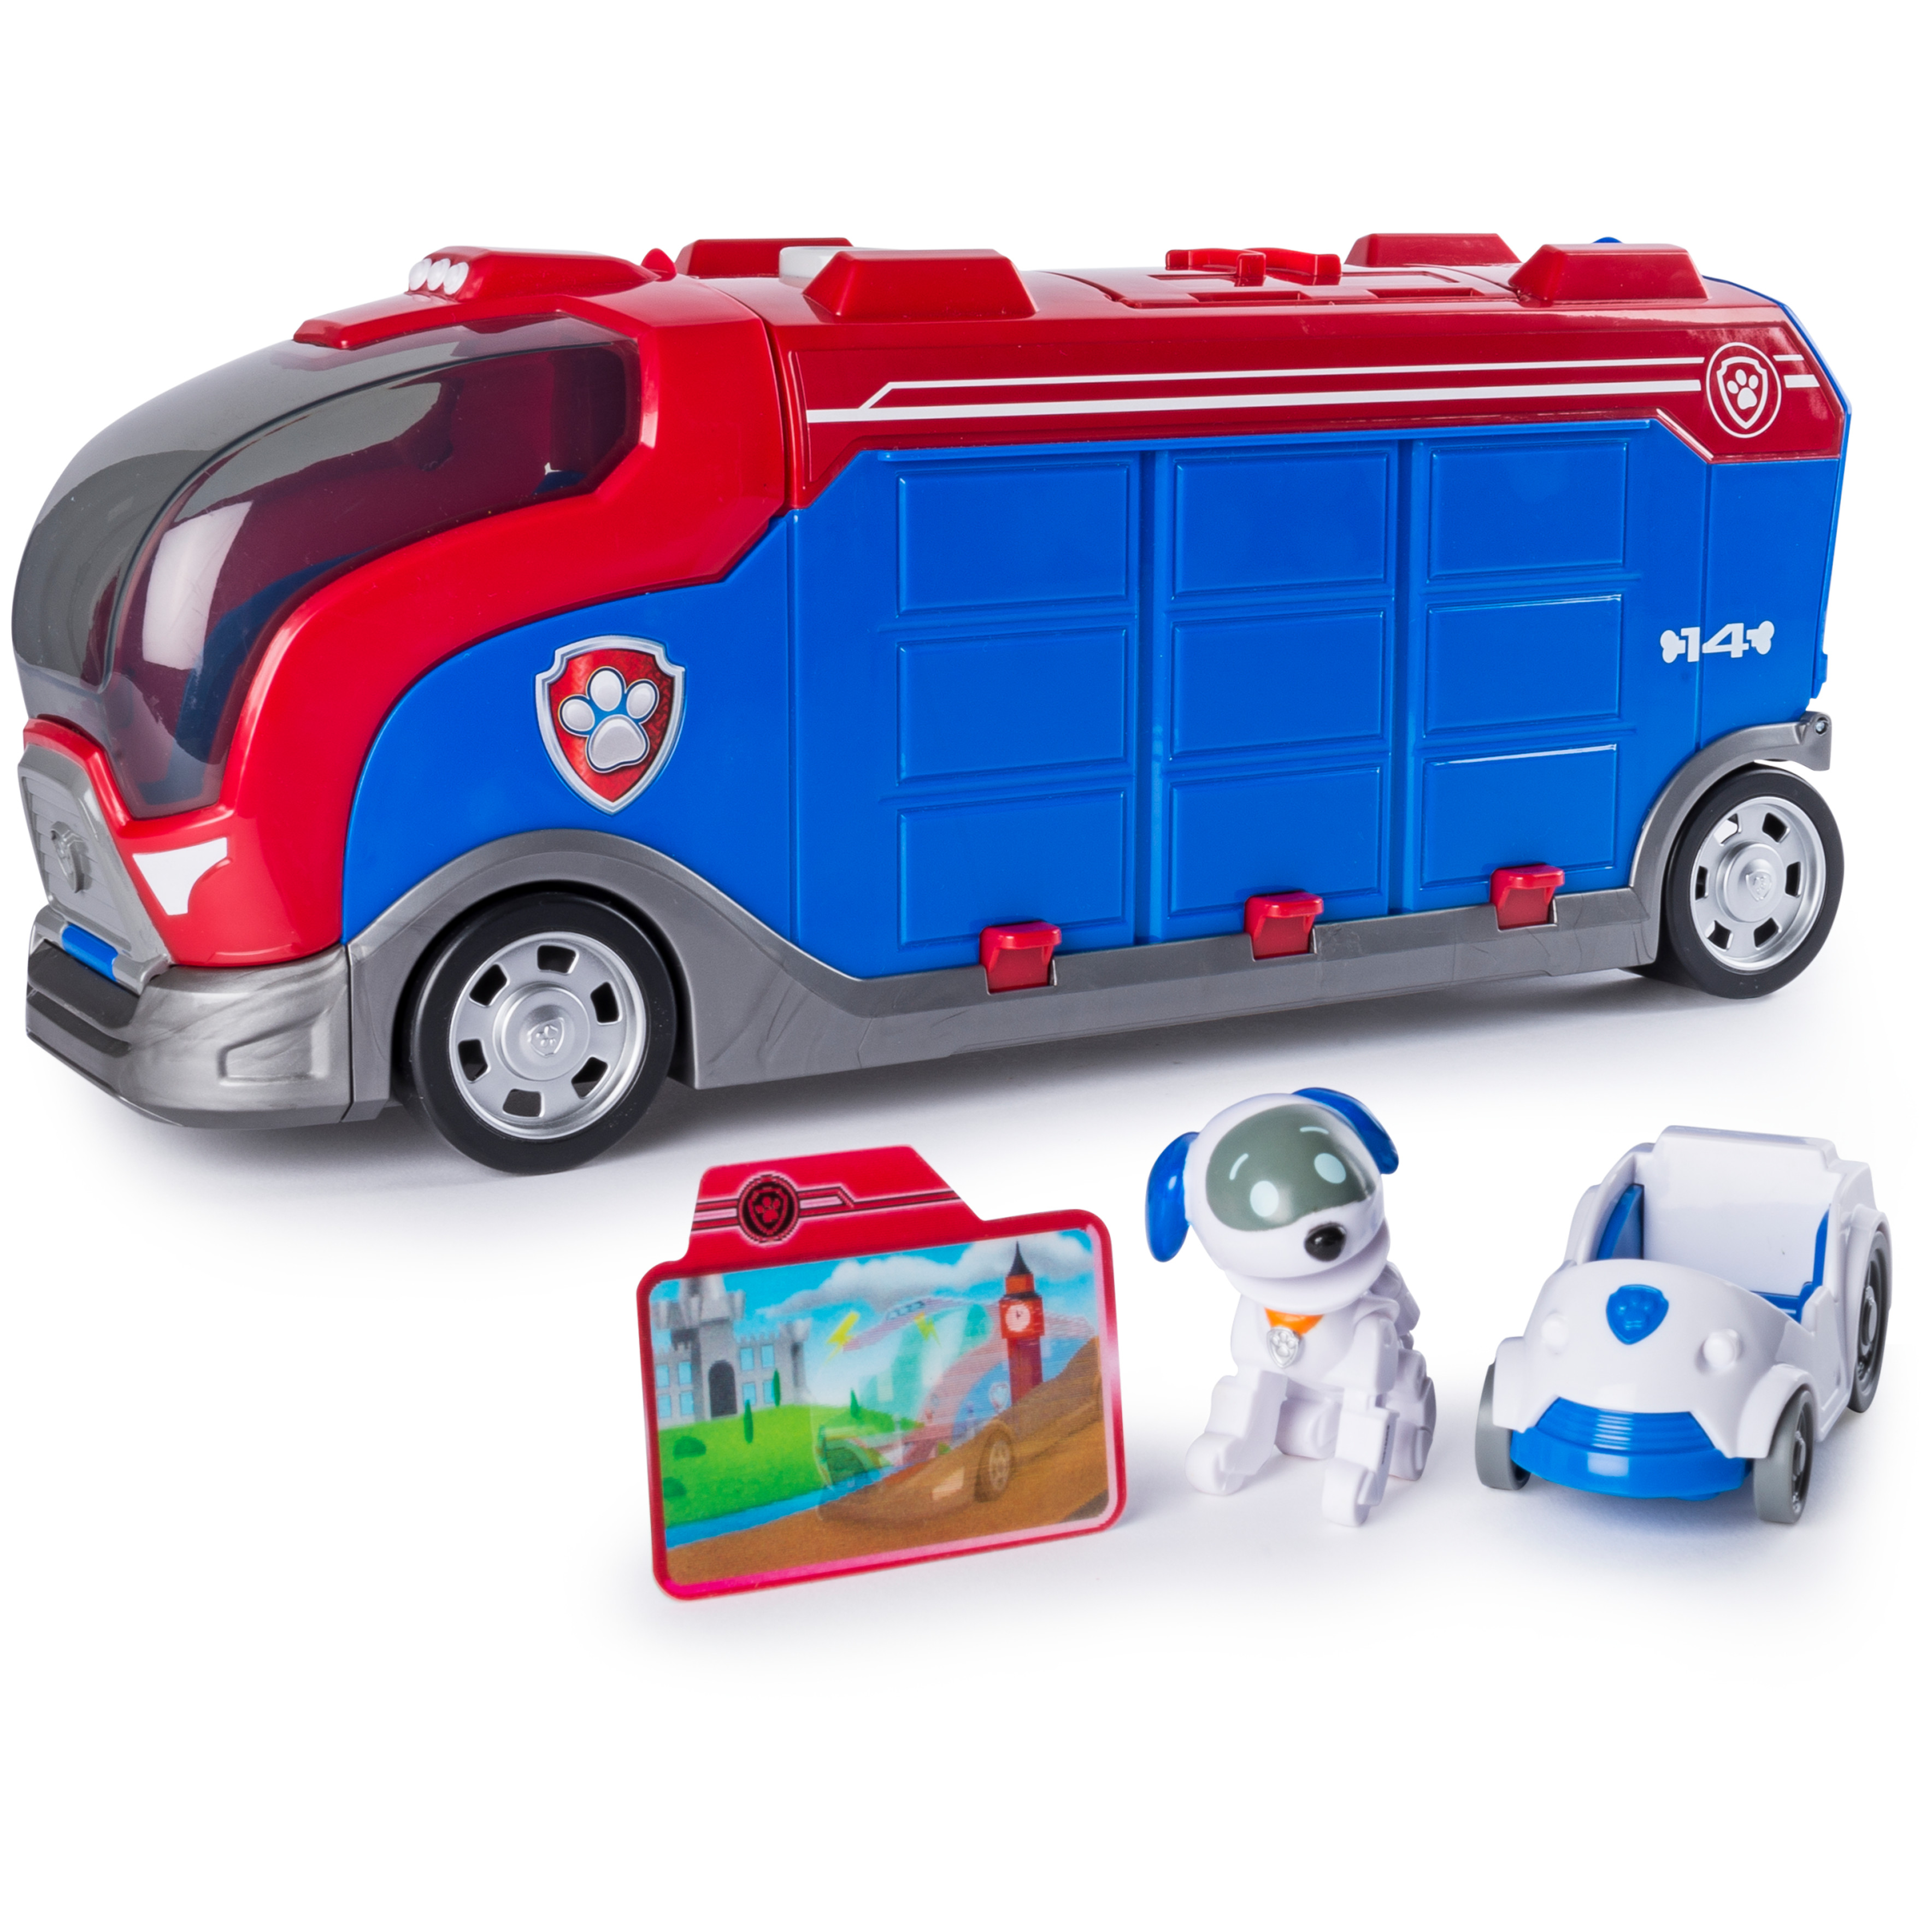 Paw Patrol Mission Paw - Mission Cruiser - Robo Dog and Vehicle - image 1 of 8